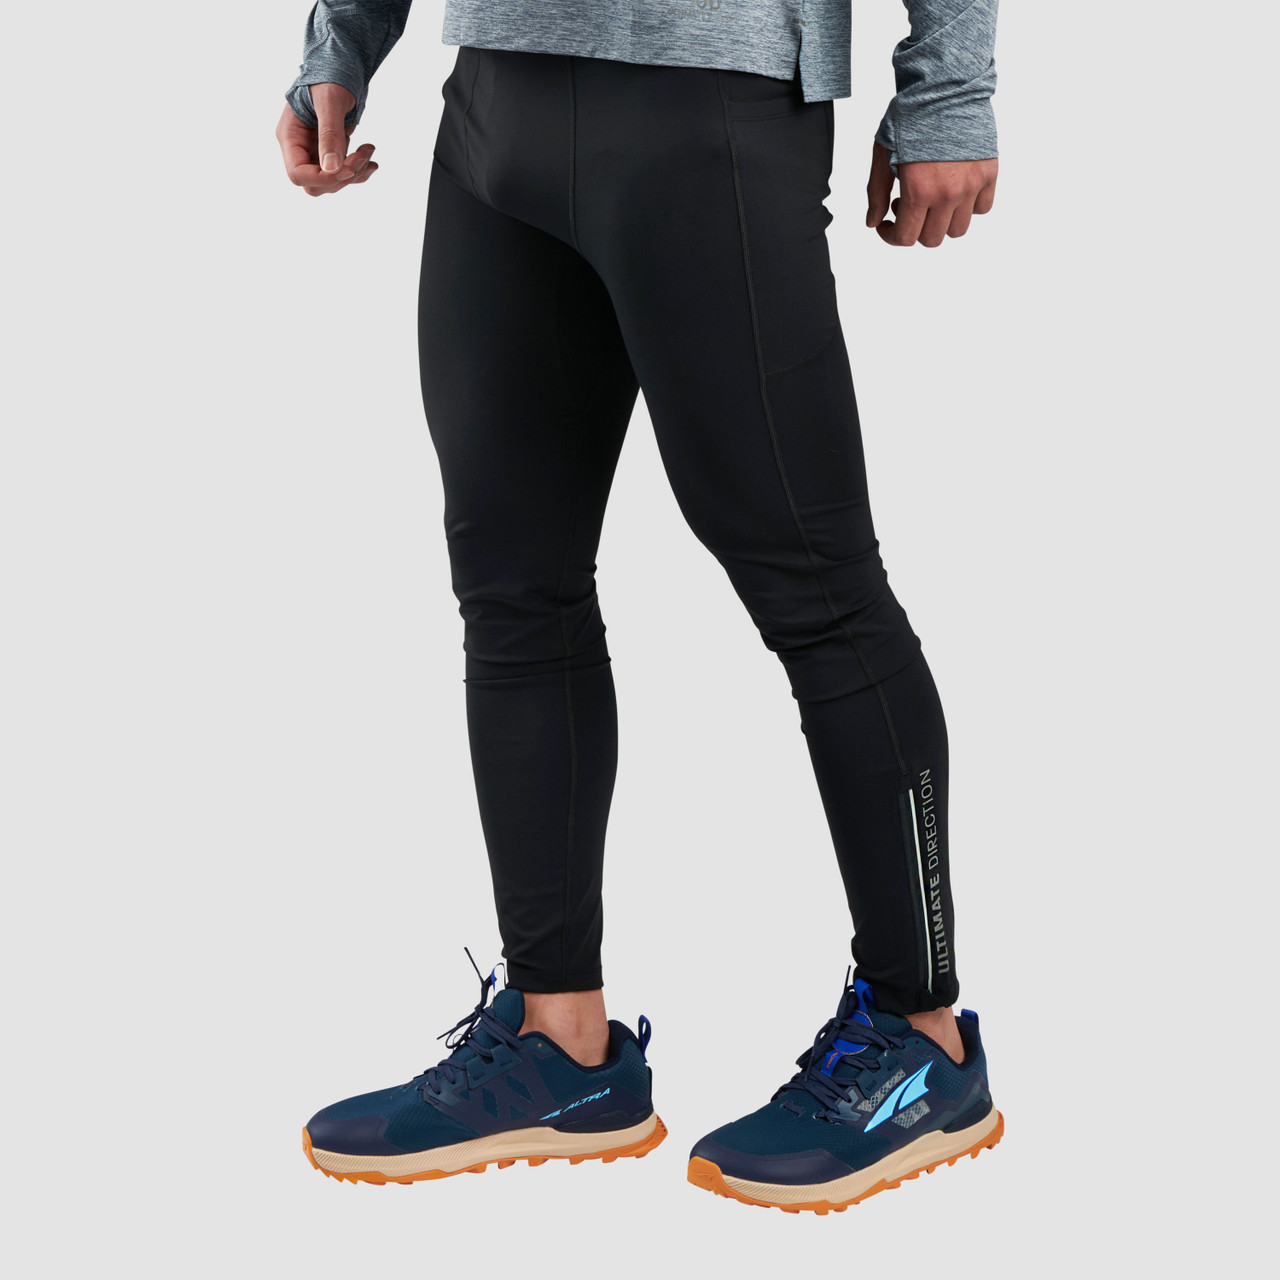 Check Out Men's Tights & Leggings: Ultimate Comfort